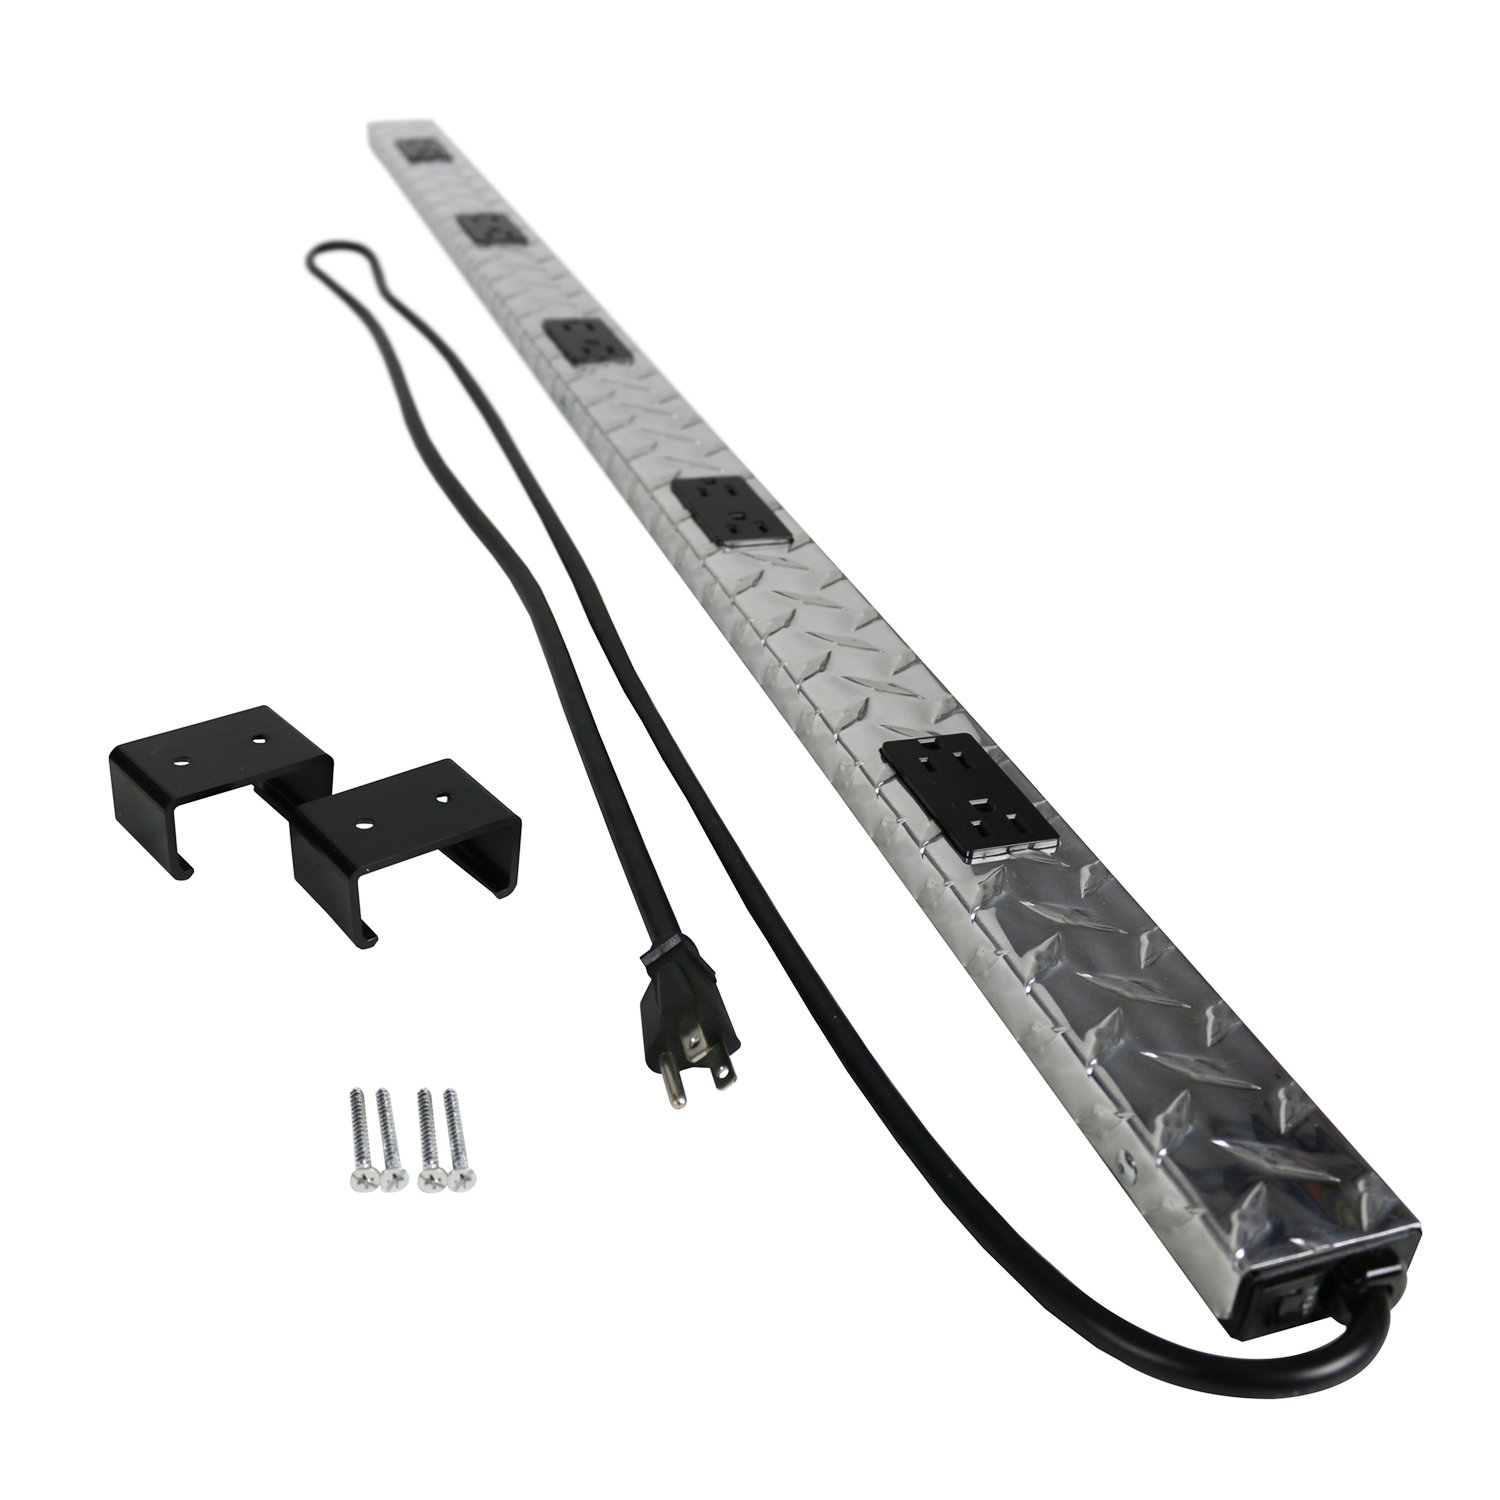 Wiremold PM48TC Power Strip Review featured image